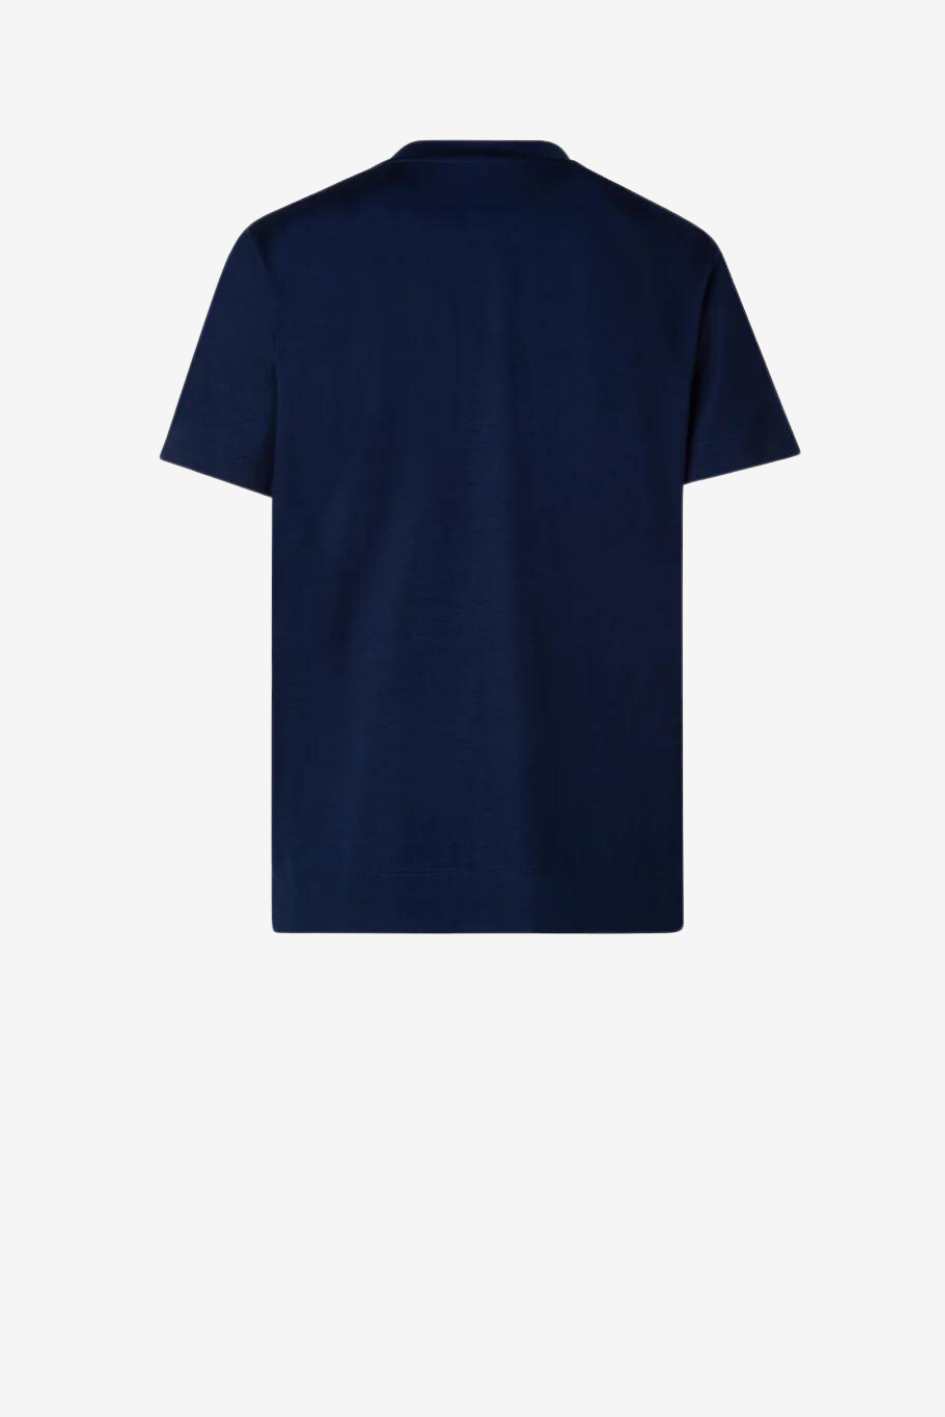 Cotton Jersey T-Shirt with Round Neck